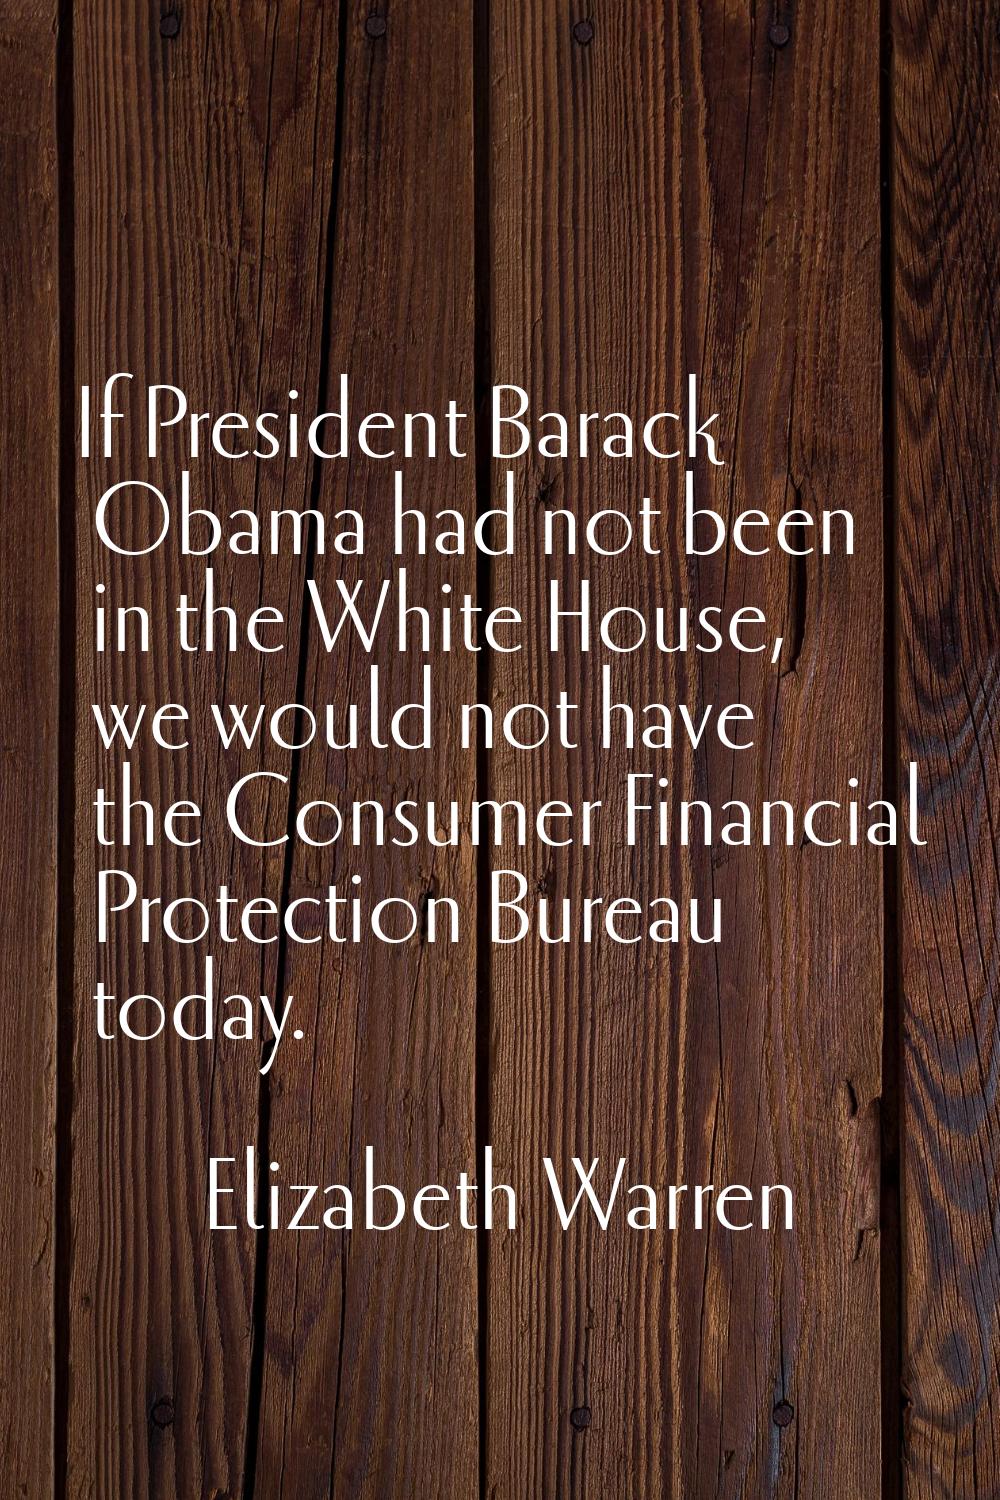 If President Barack Obama had not been in the White House, we would not have the Consumer Financial